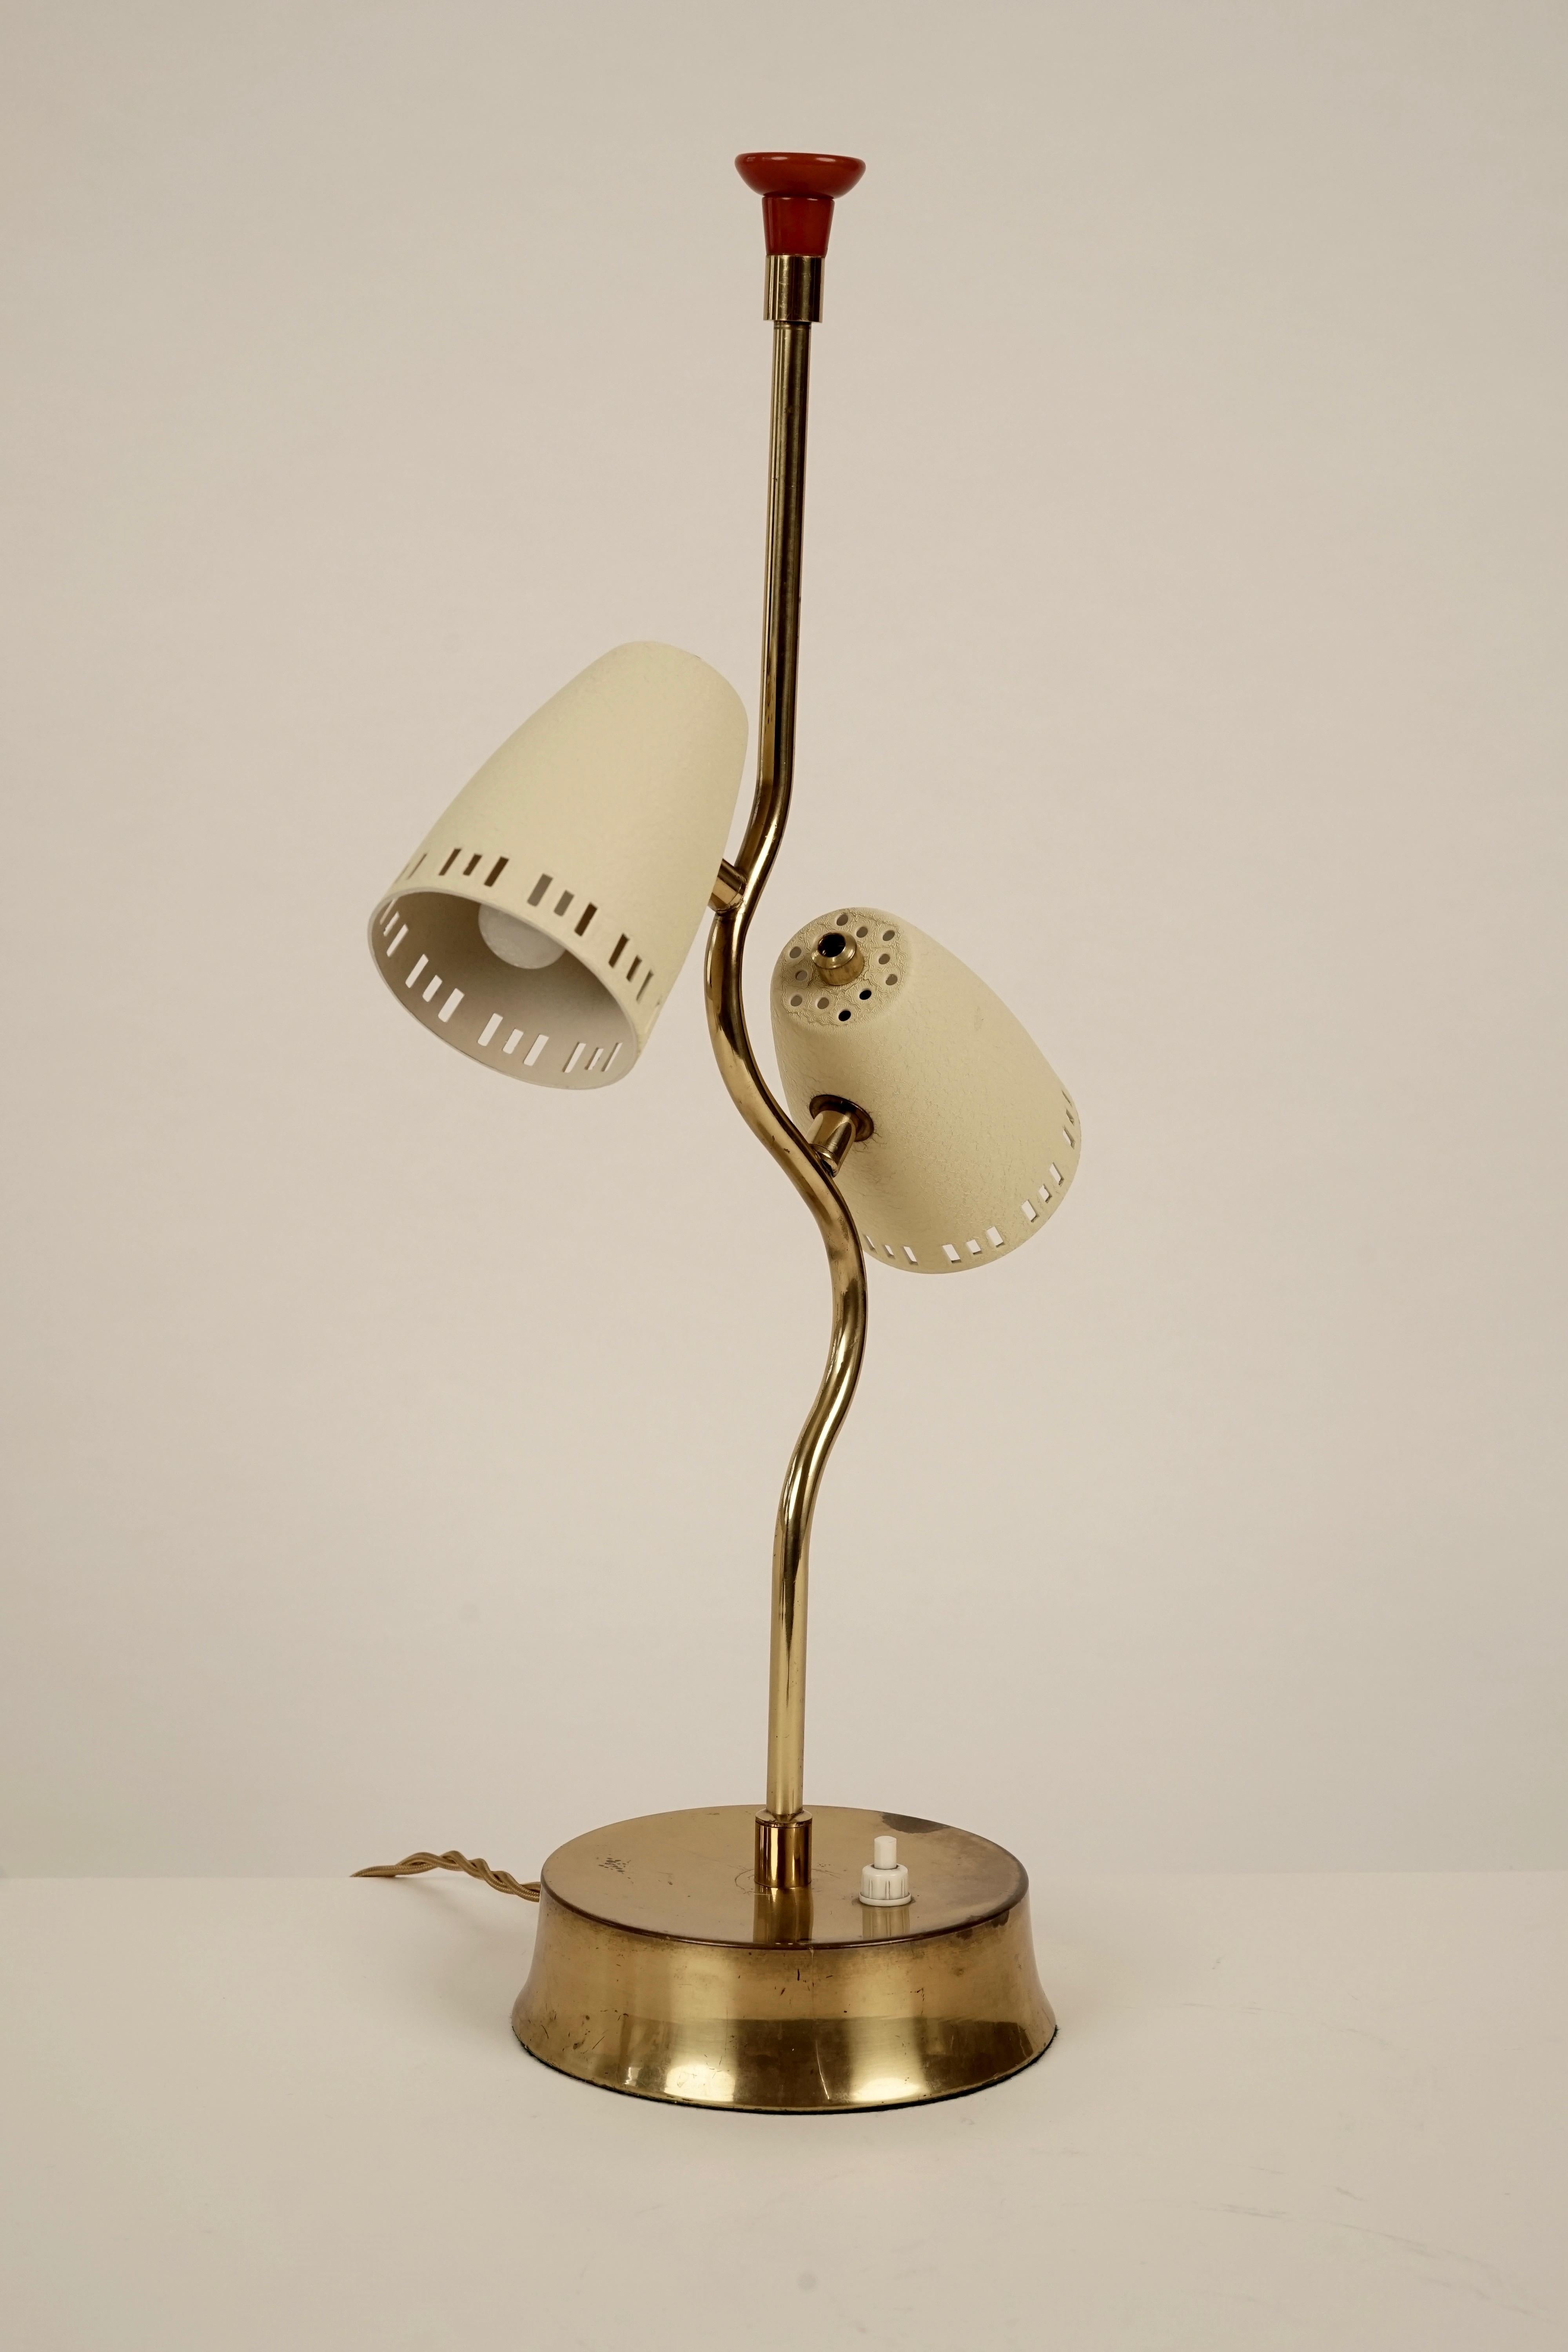 This delicate, humorful table lamp from Austria dates circa 1950s. Made of brass with off white colored shades and a bakelite grip in red.
It comes with a cloth covered cable. The shades do not rotate. To change position you turn the lamp, while